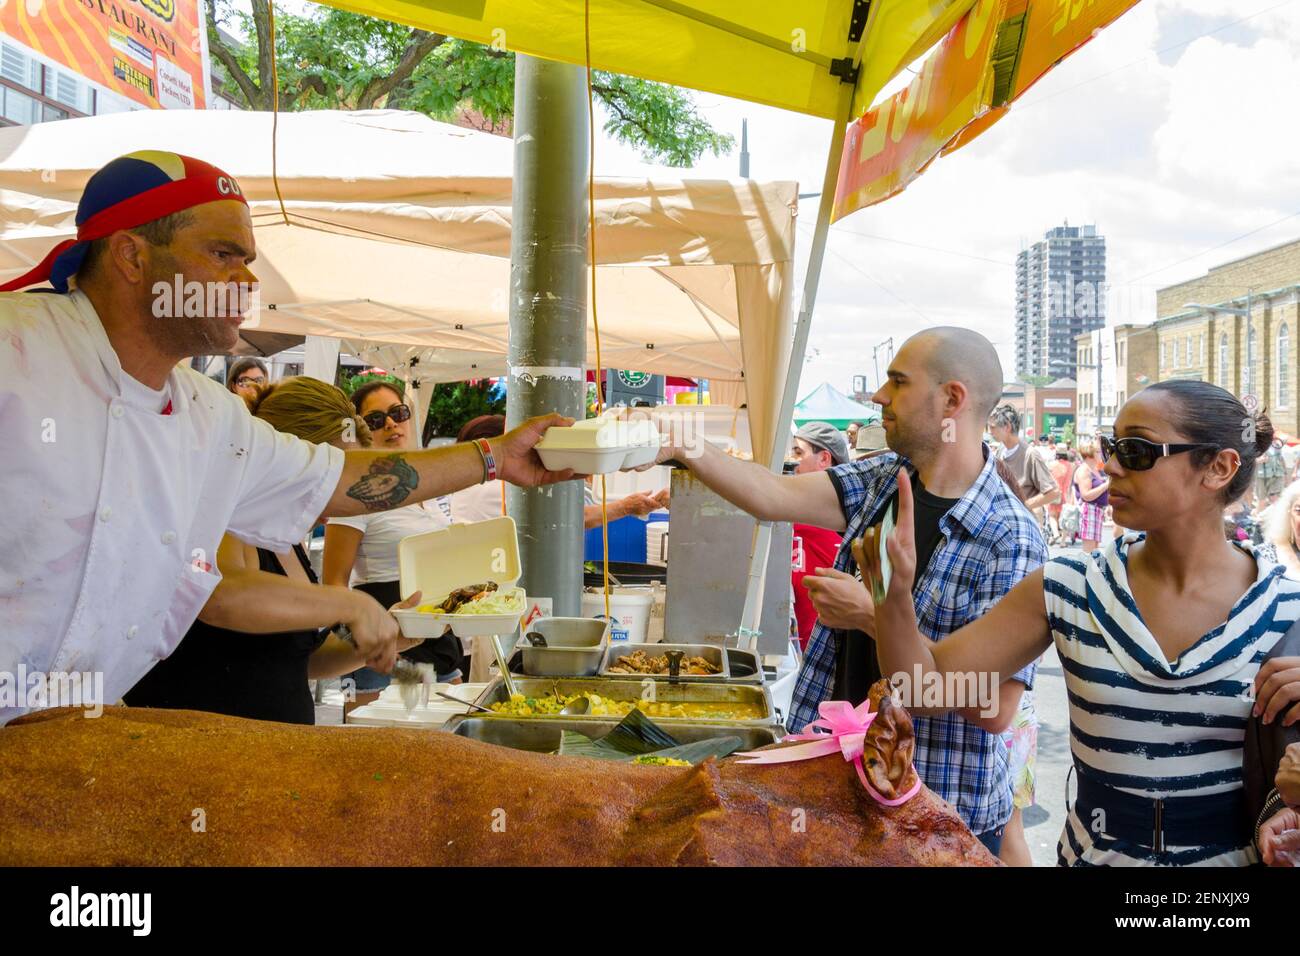 Salsa on St. Saint Clair Festival Scenes: A chef in a head kerchief hands over a container of food to a man with a shaved head at the same time that h Stock Photo